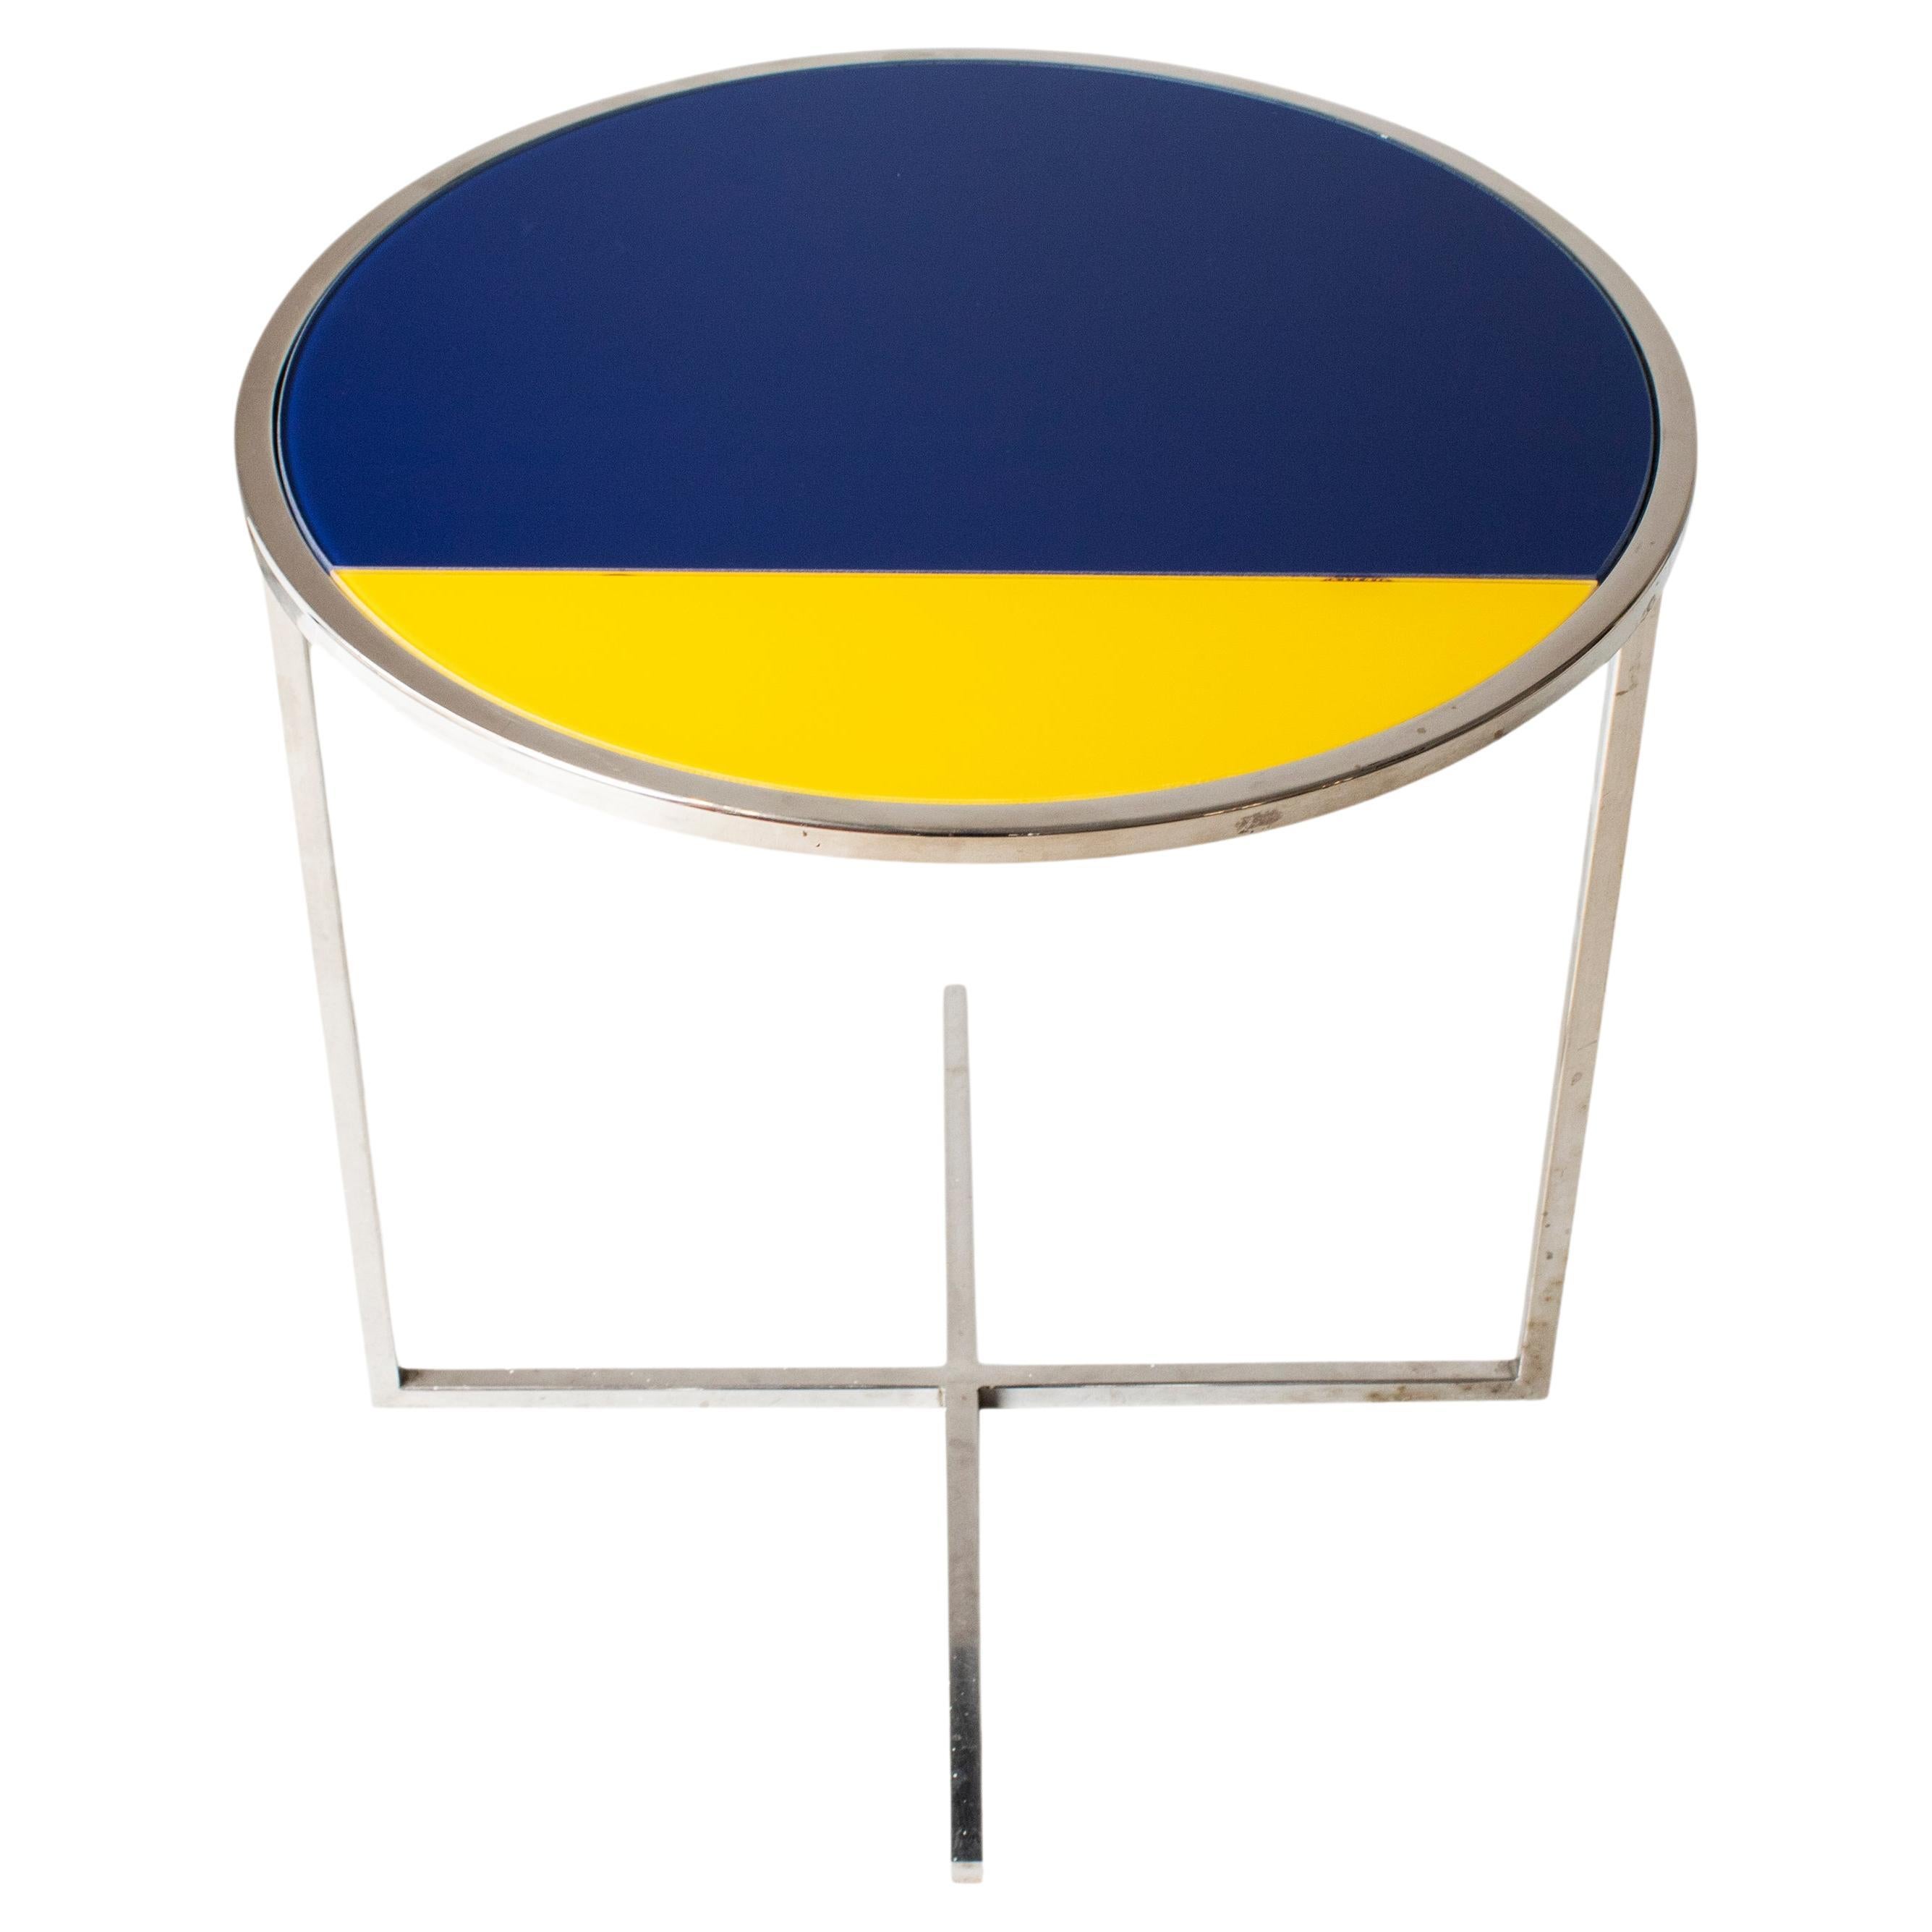 Contemporary Chromed Steel Blue and Yellow Glass Round Center Table, Italy, 1970 For Sale